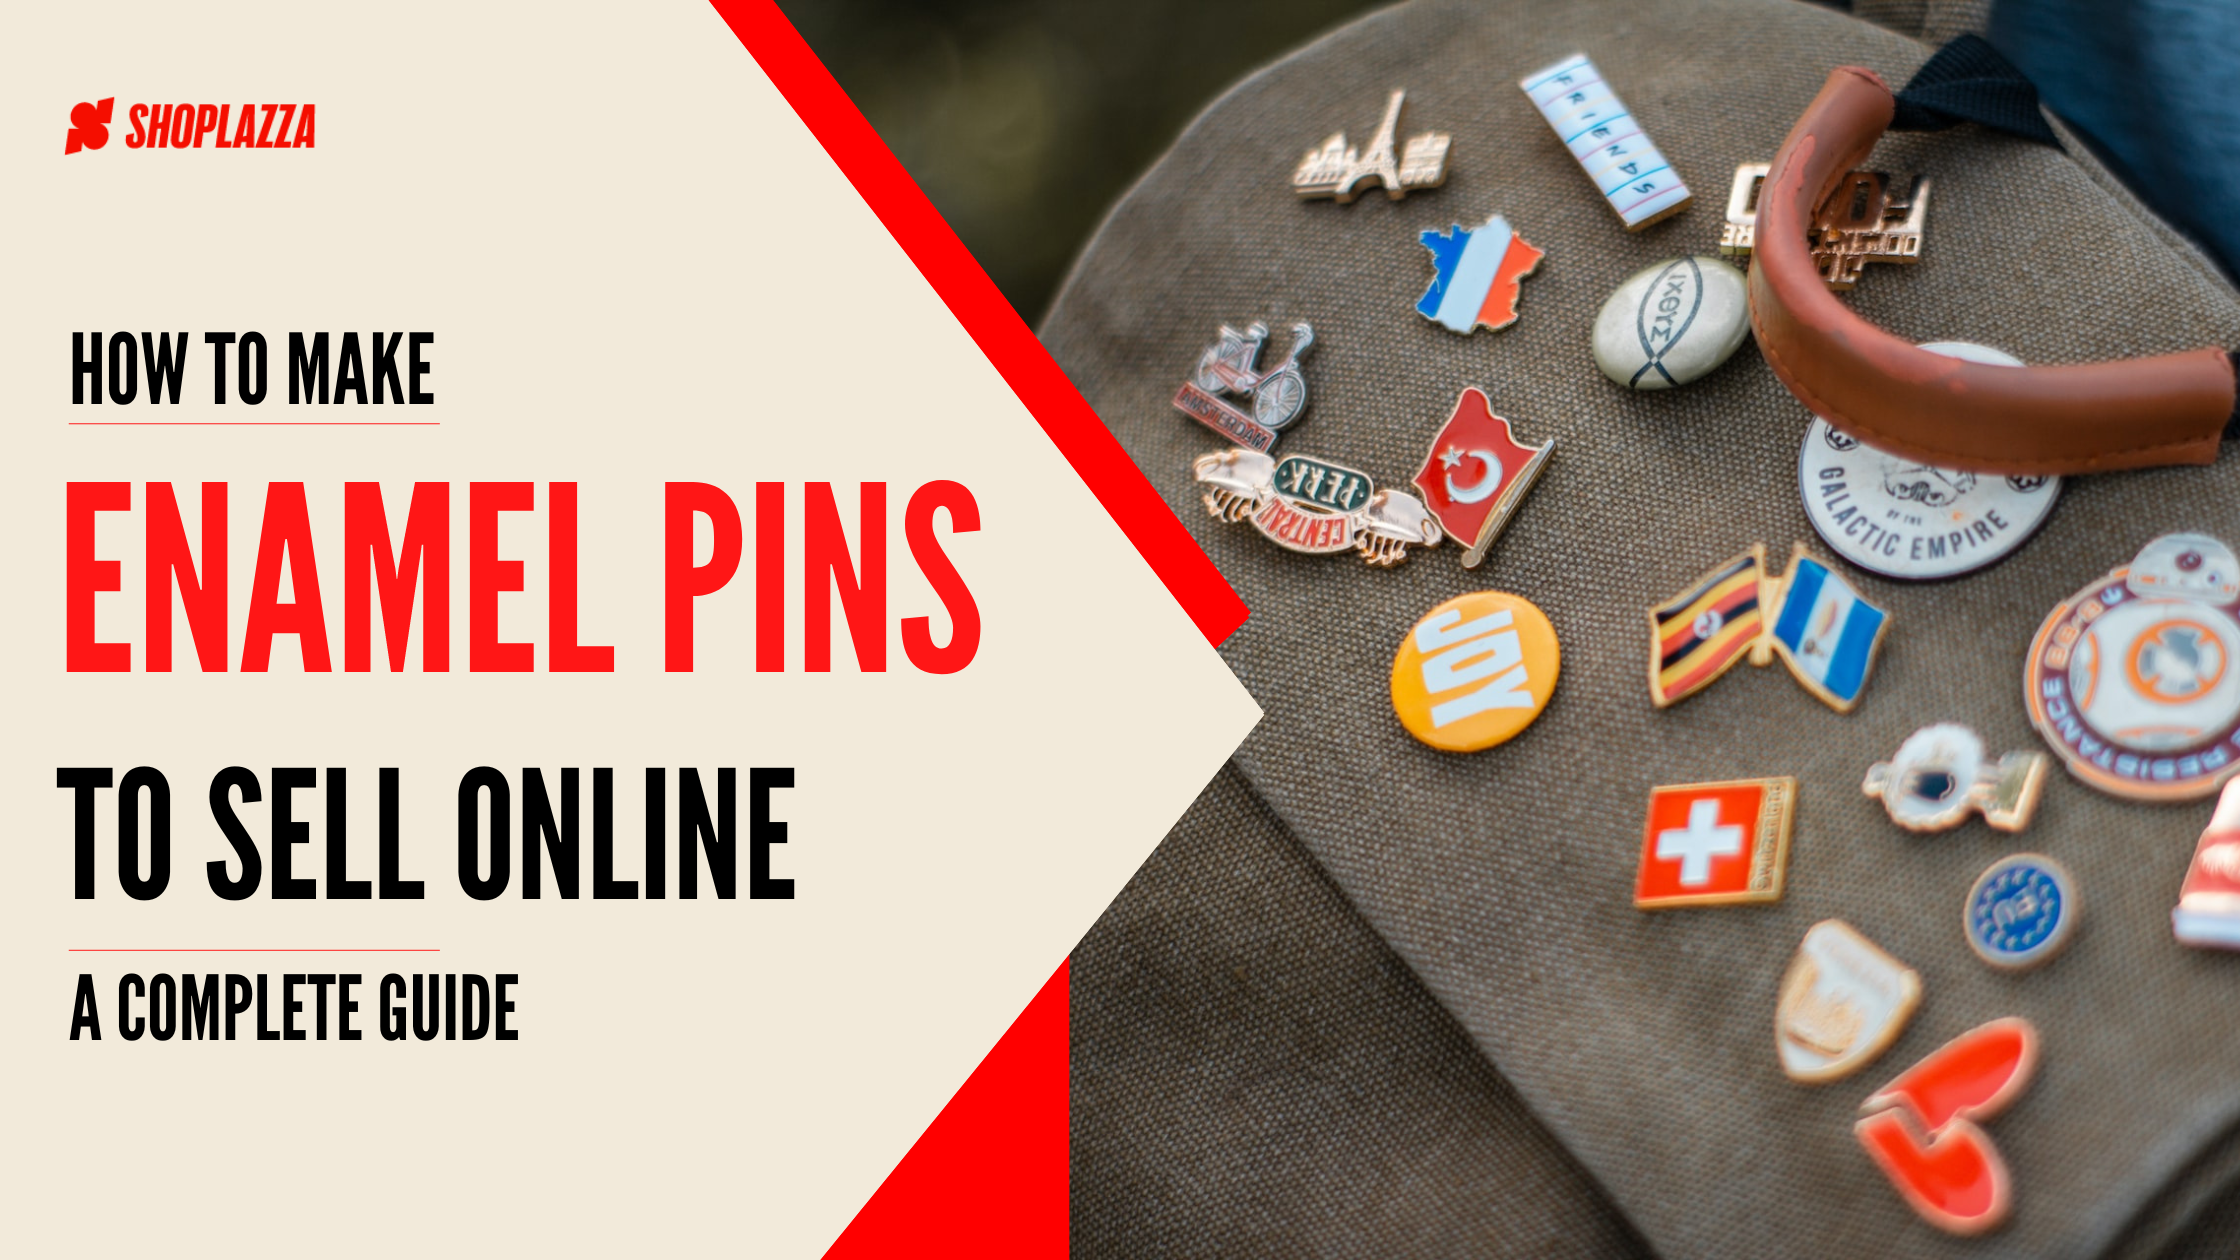 How to Make Enamel Pins to Sell Online: A Complete Guide